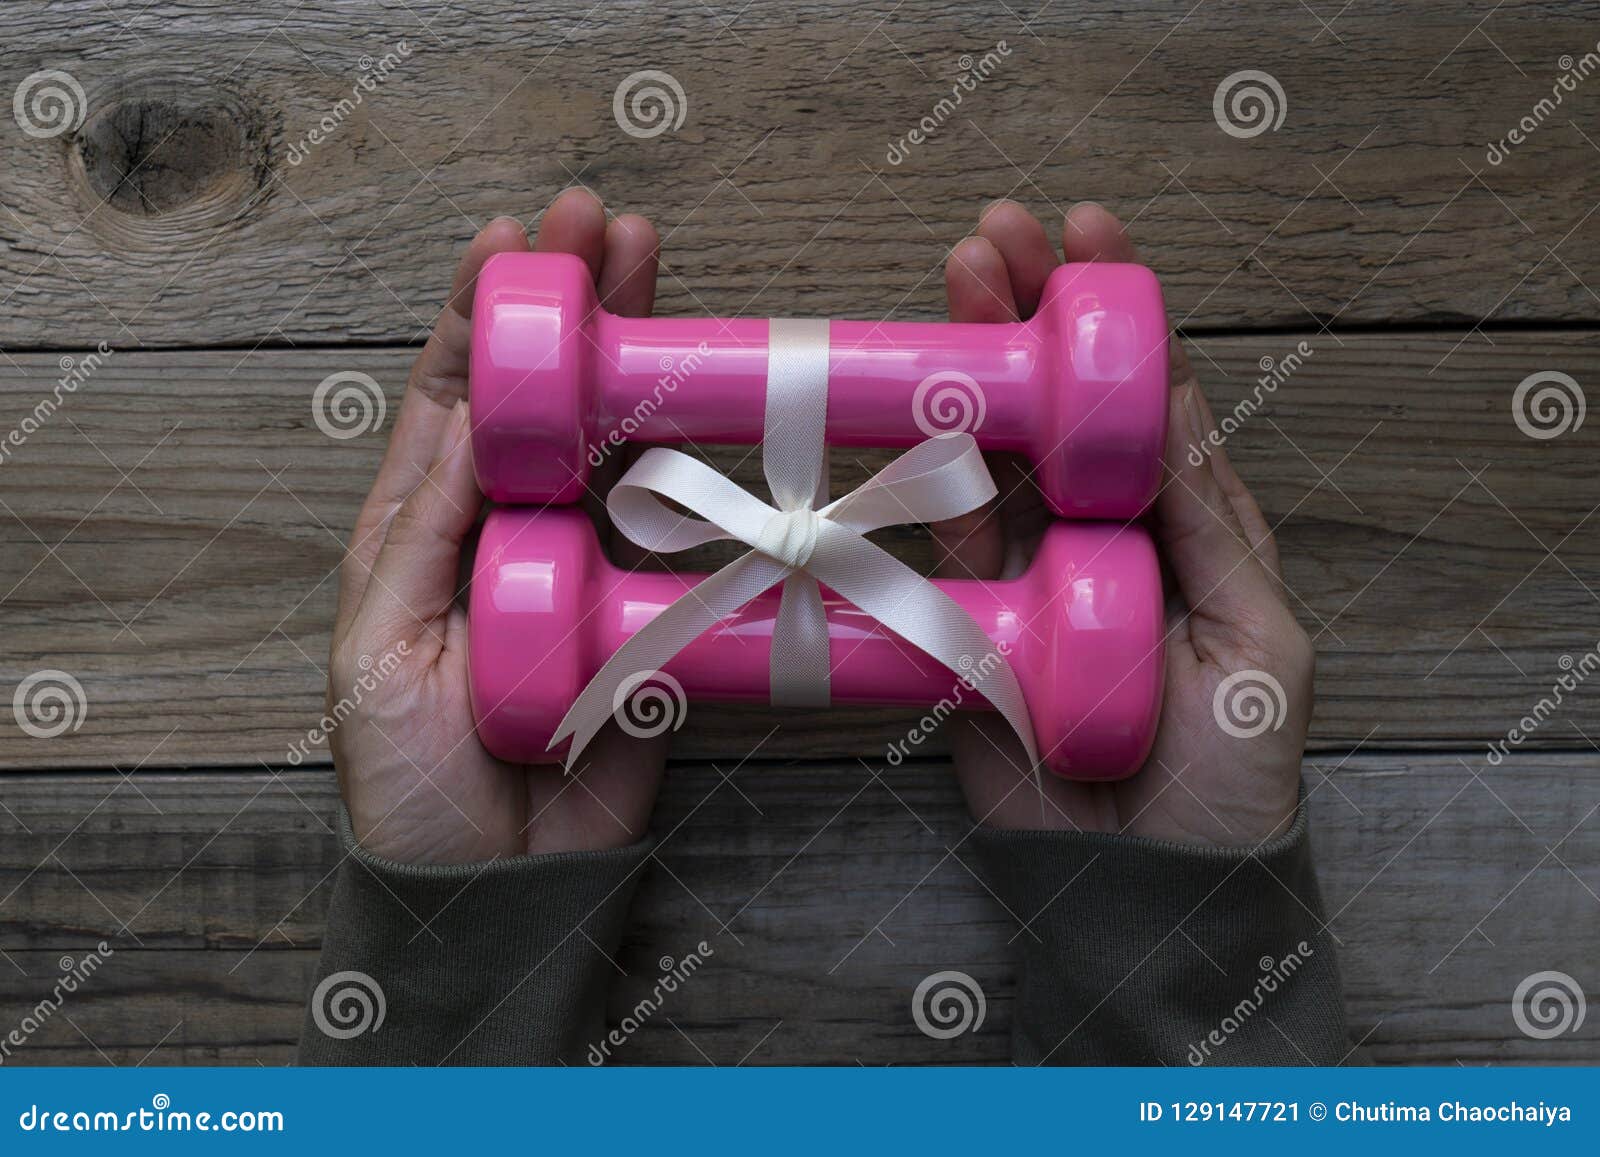 A Gift, Dumbbells, For Health And Training Stock Image - Image of ...